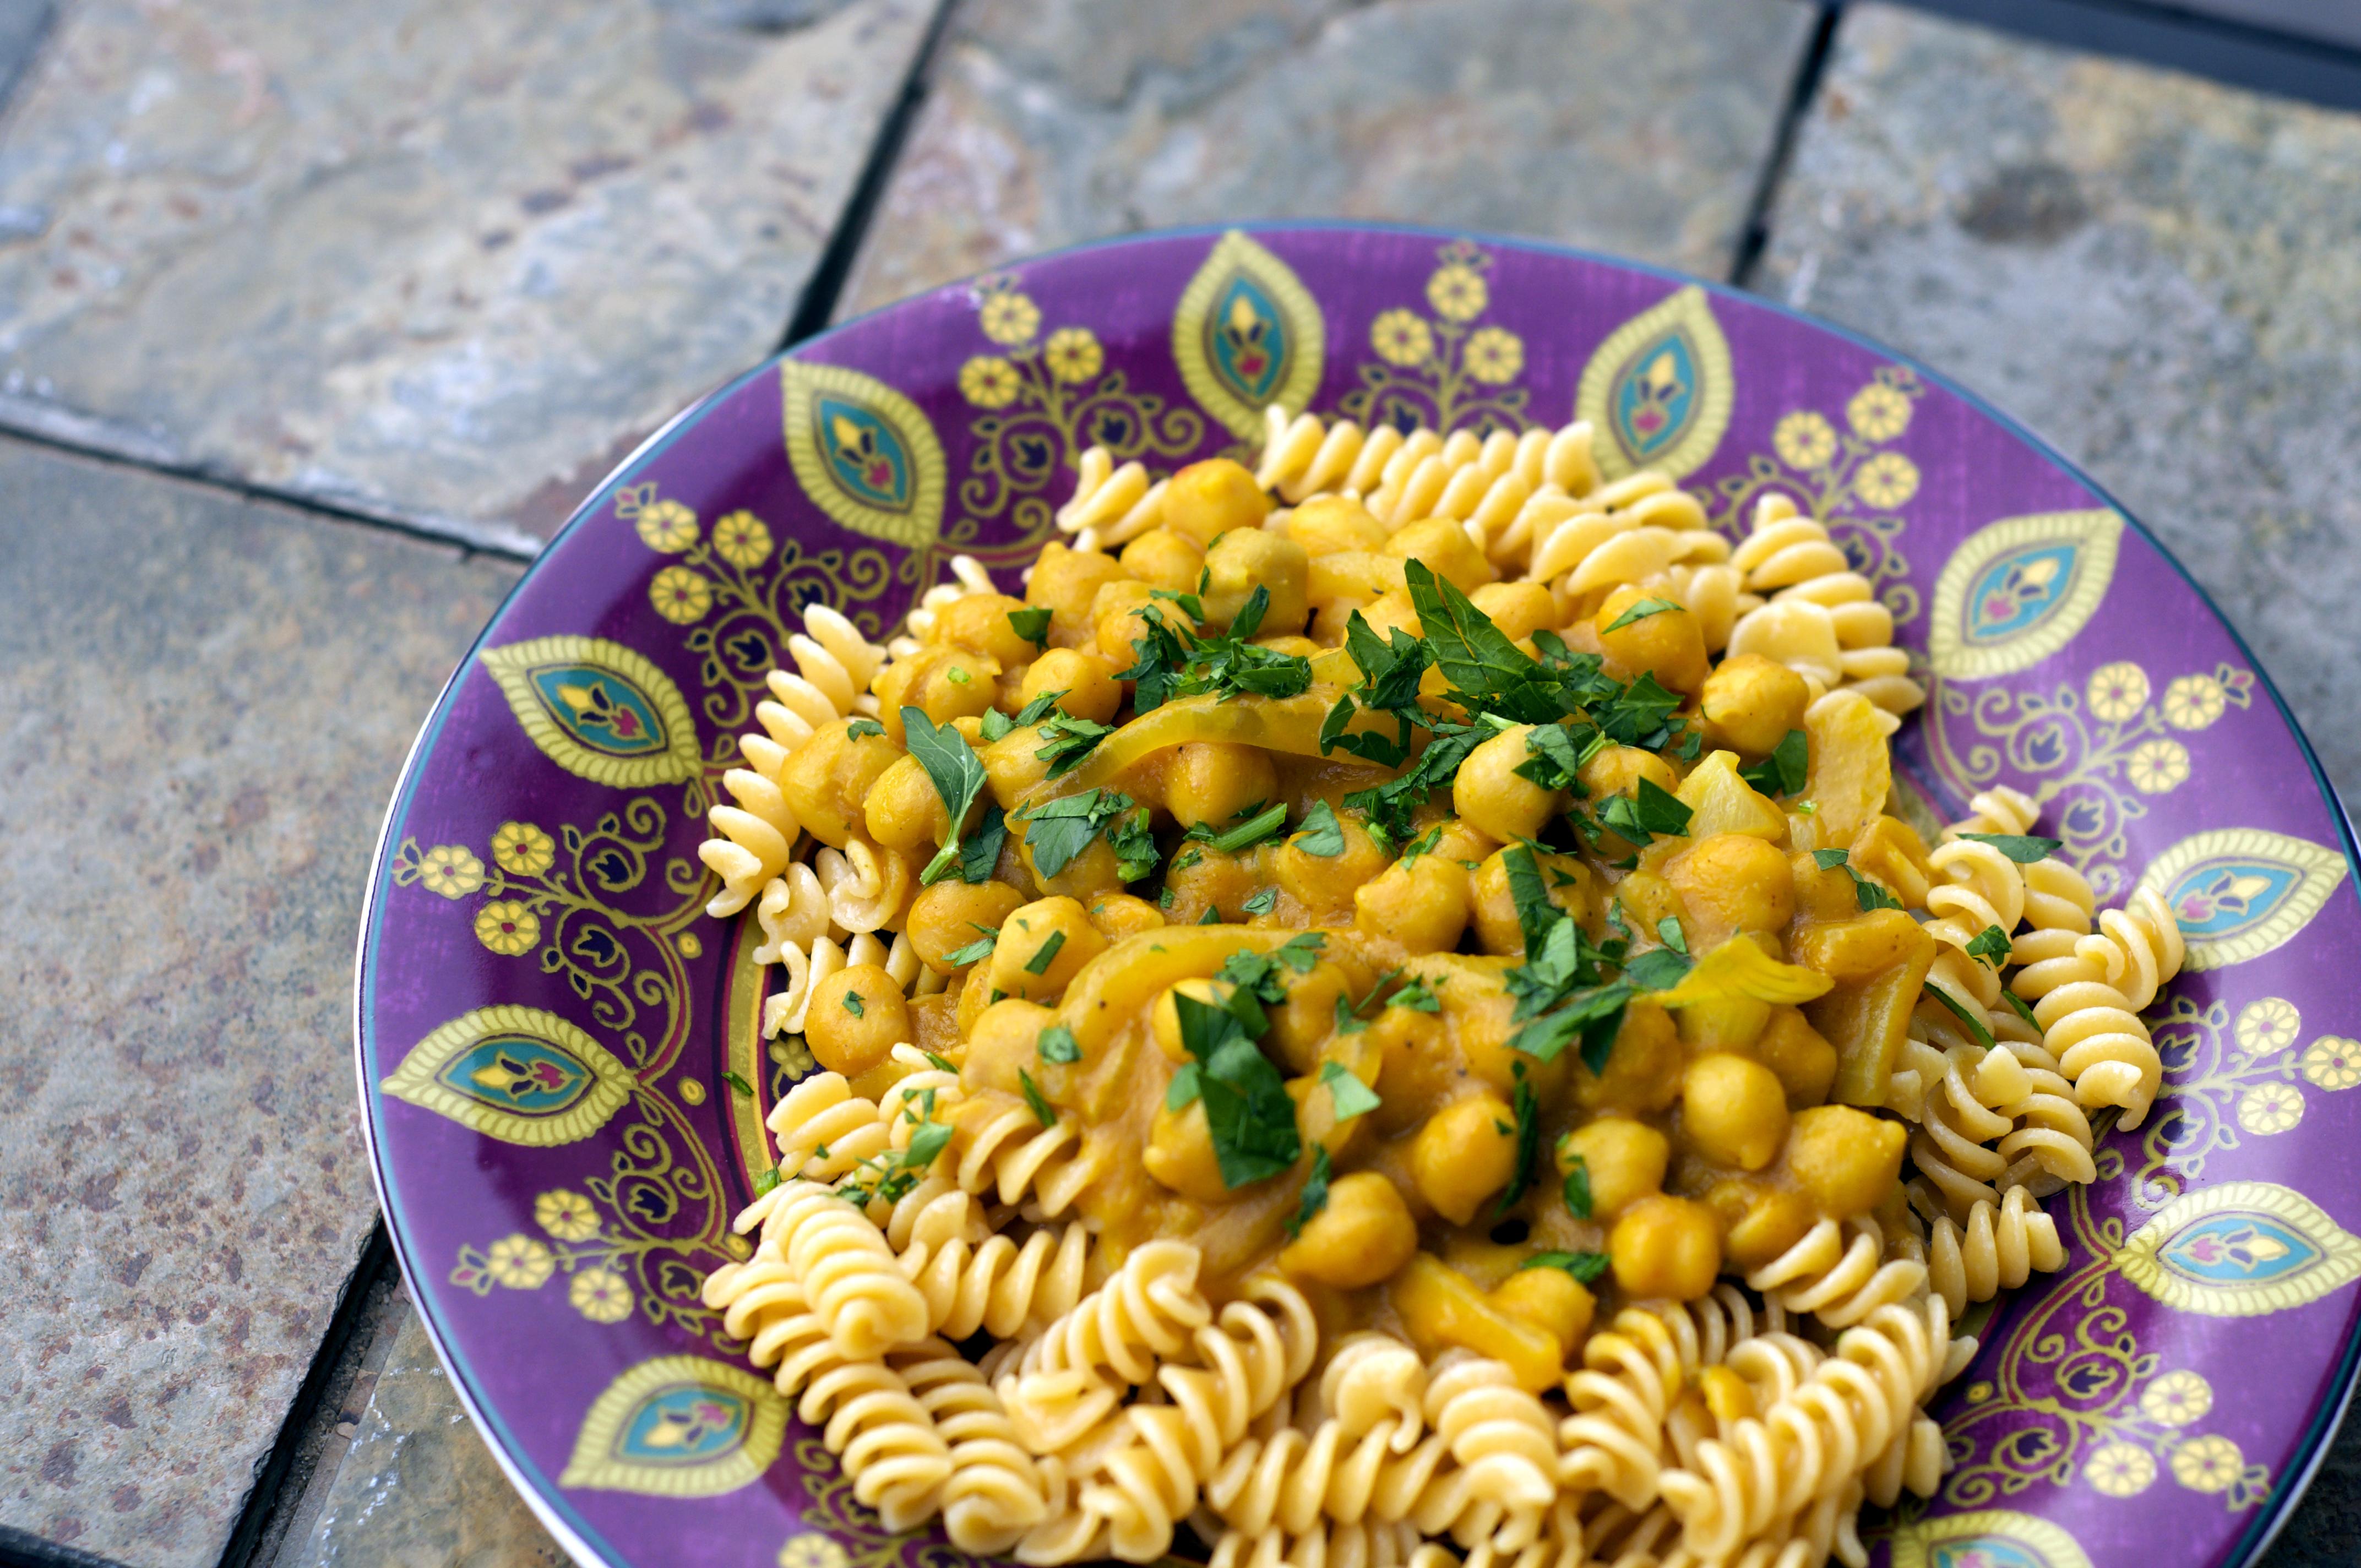 Pasta with pumpkin chickpea sauce and basil in a colorful purple bowl.